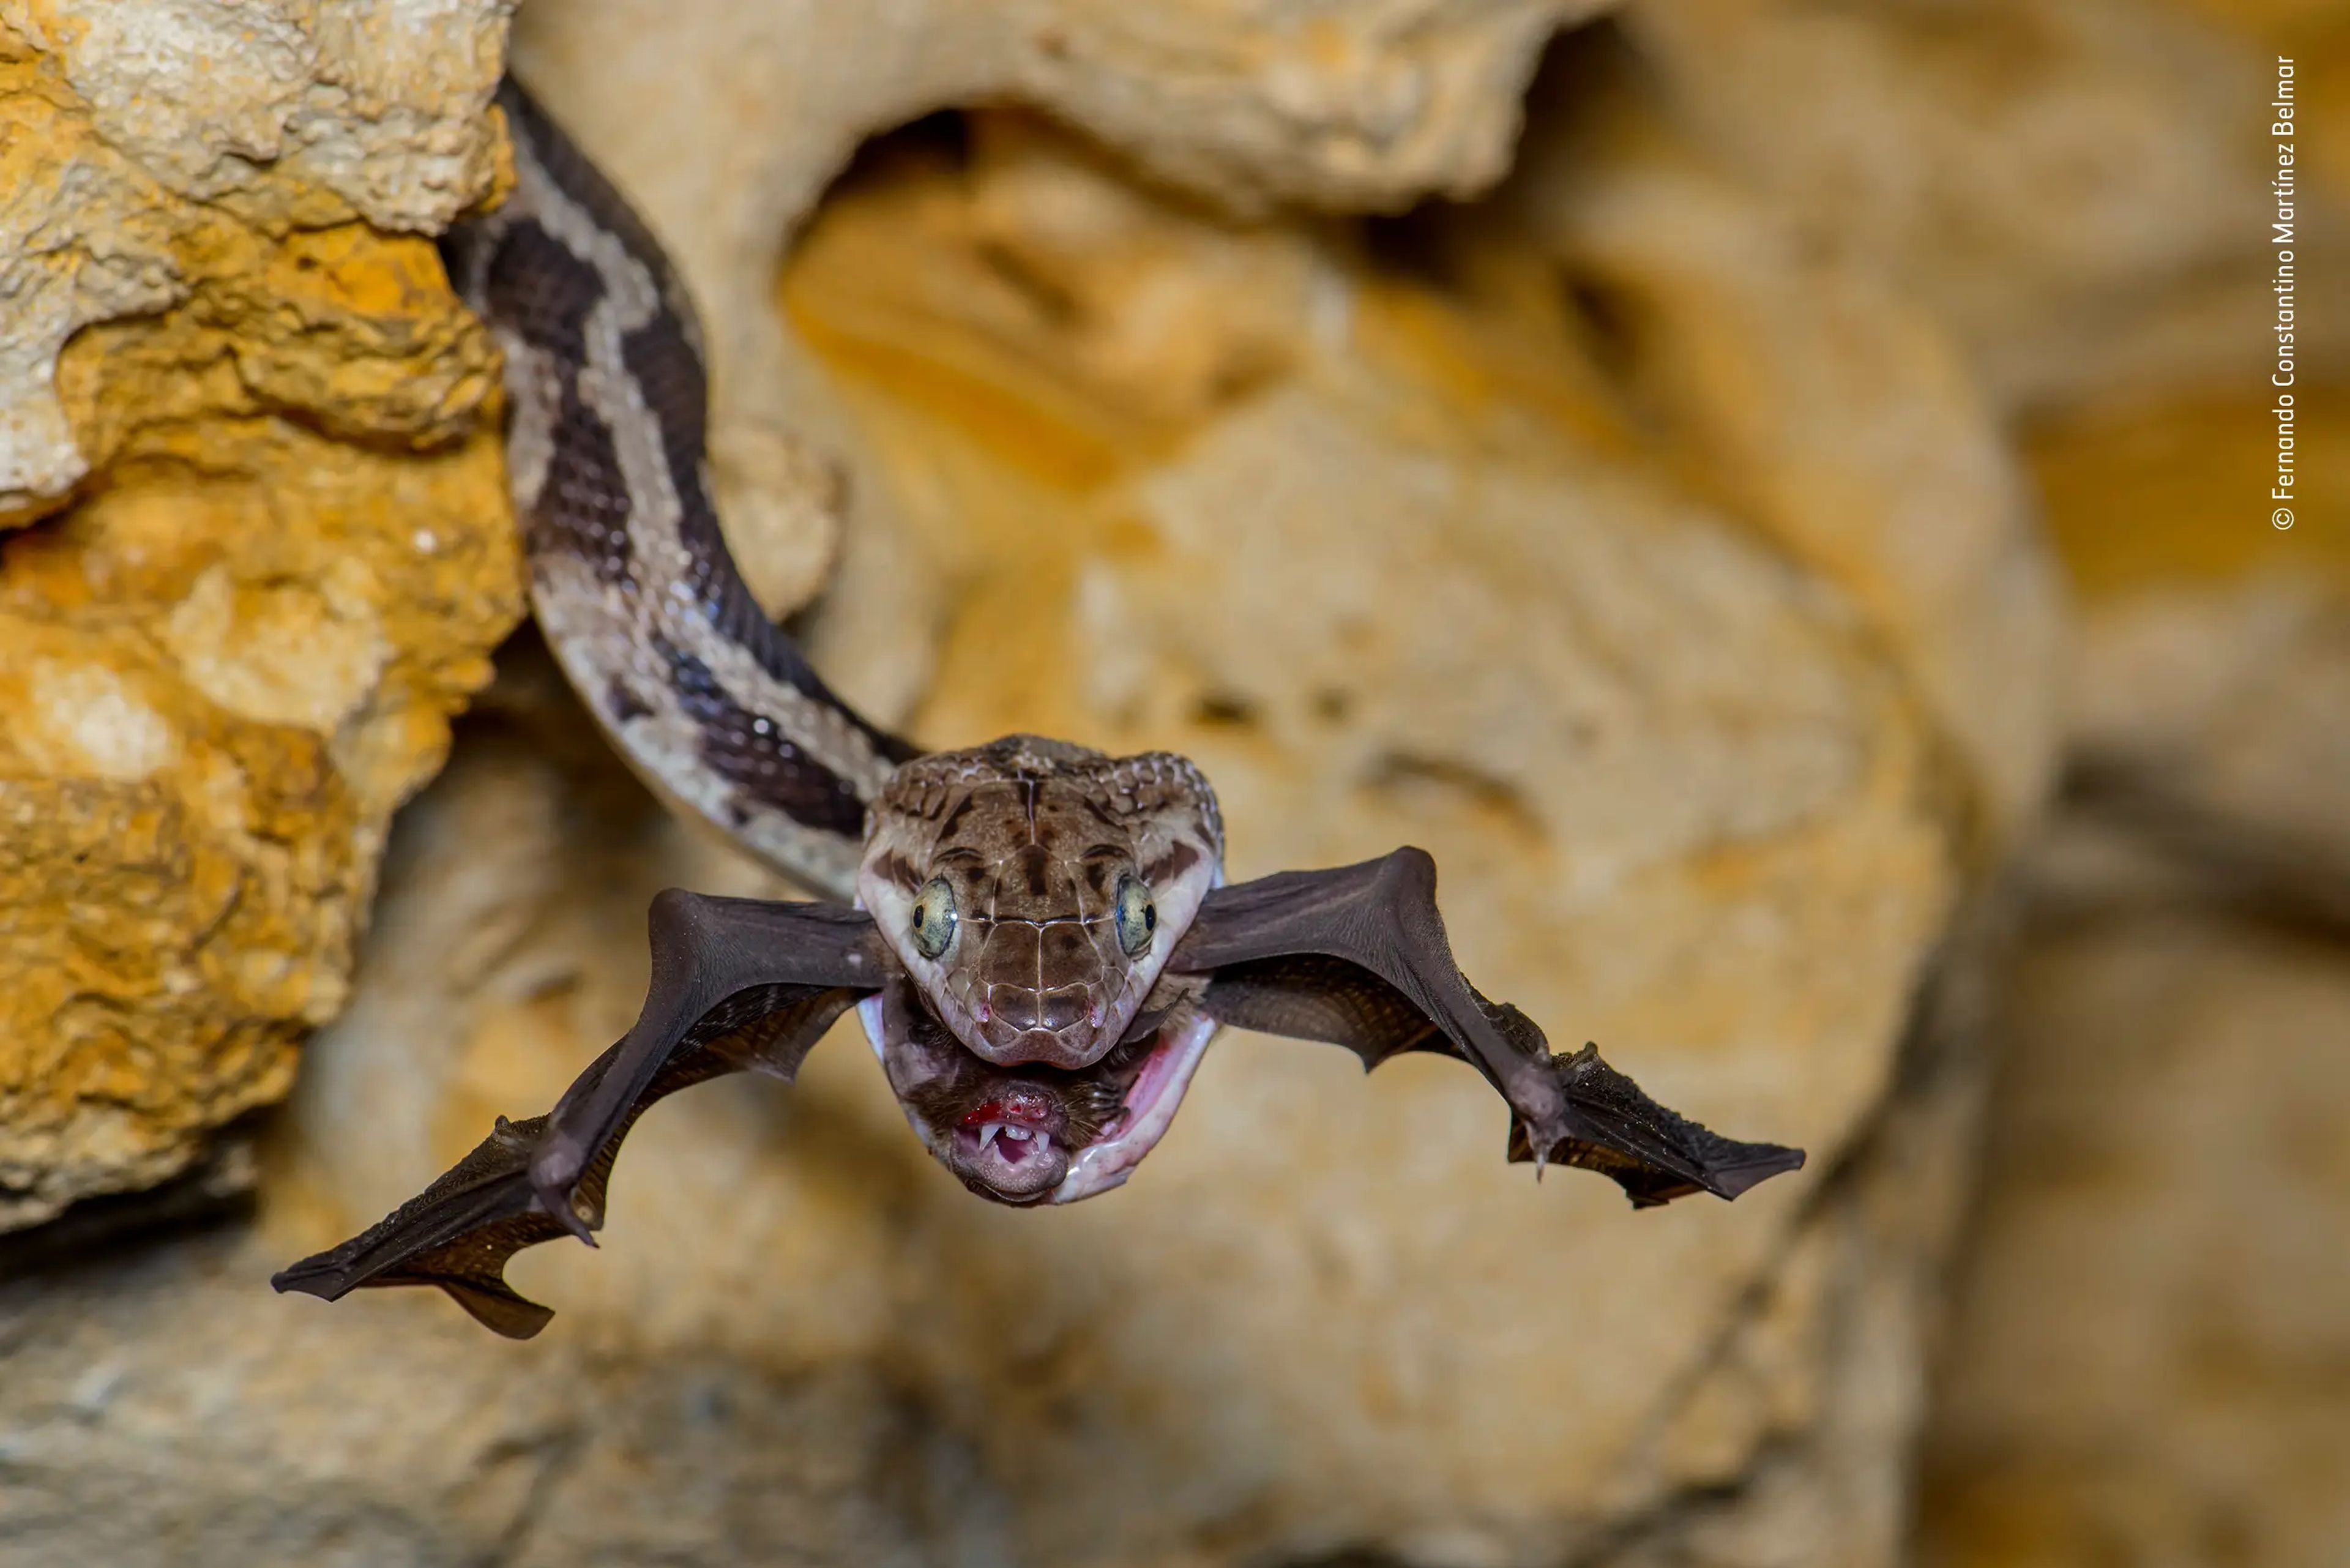 snake with bat in mouth poking out of rocks